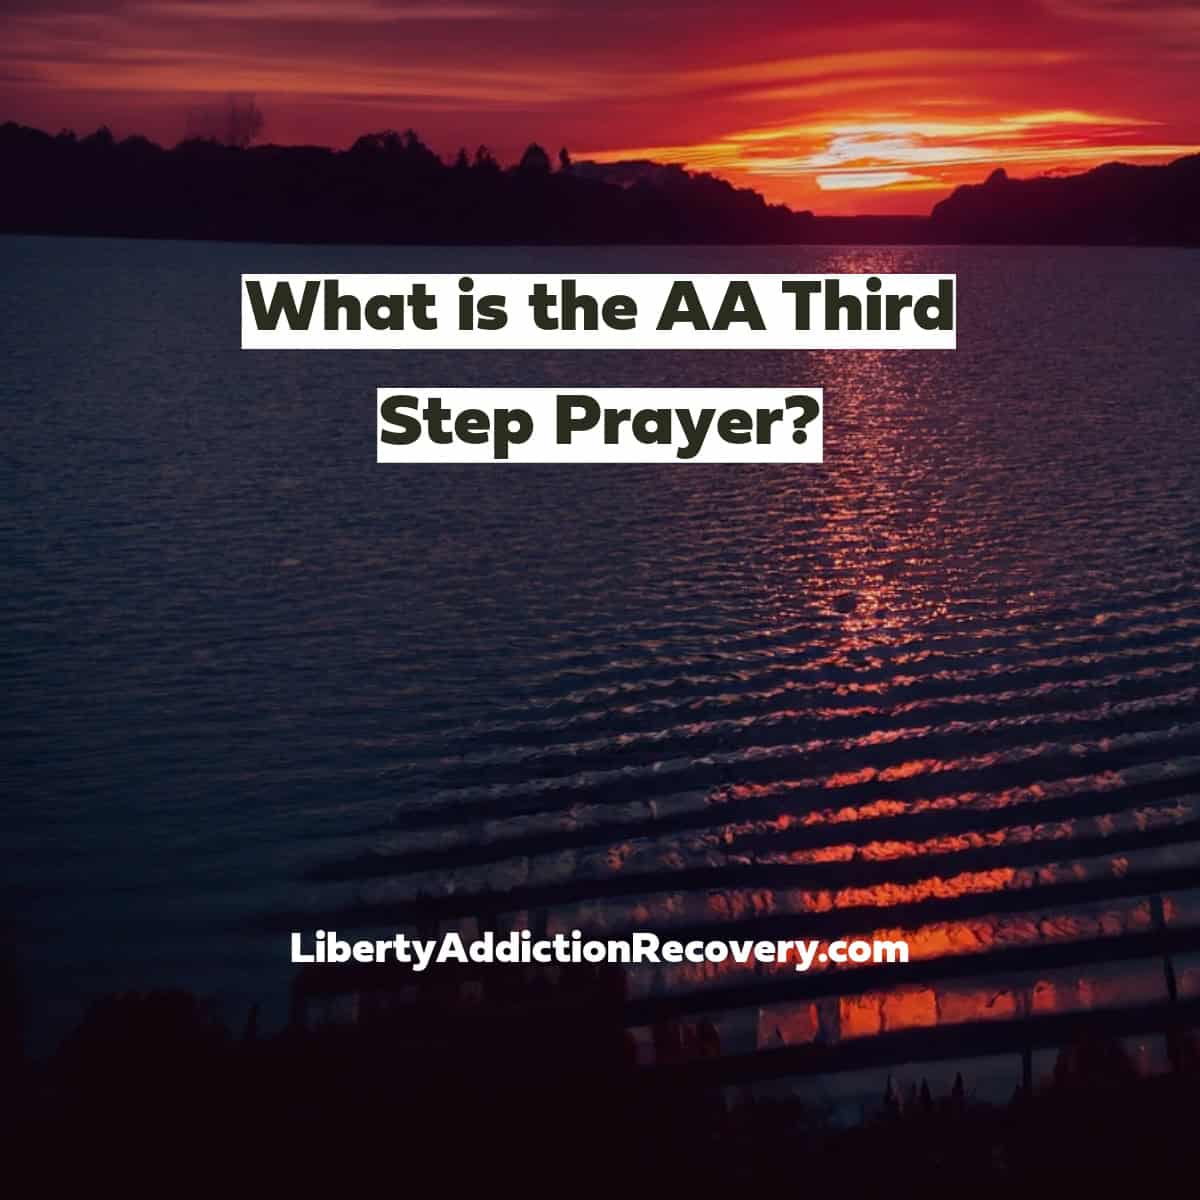 What is the AA Third Step Prayer